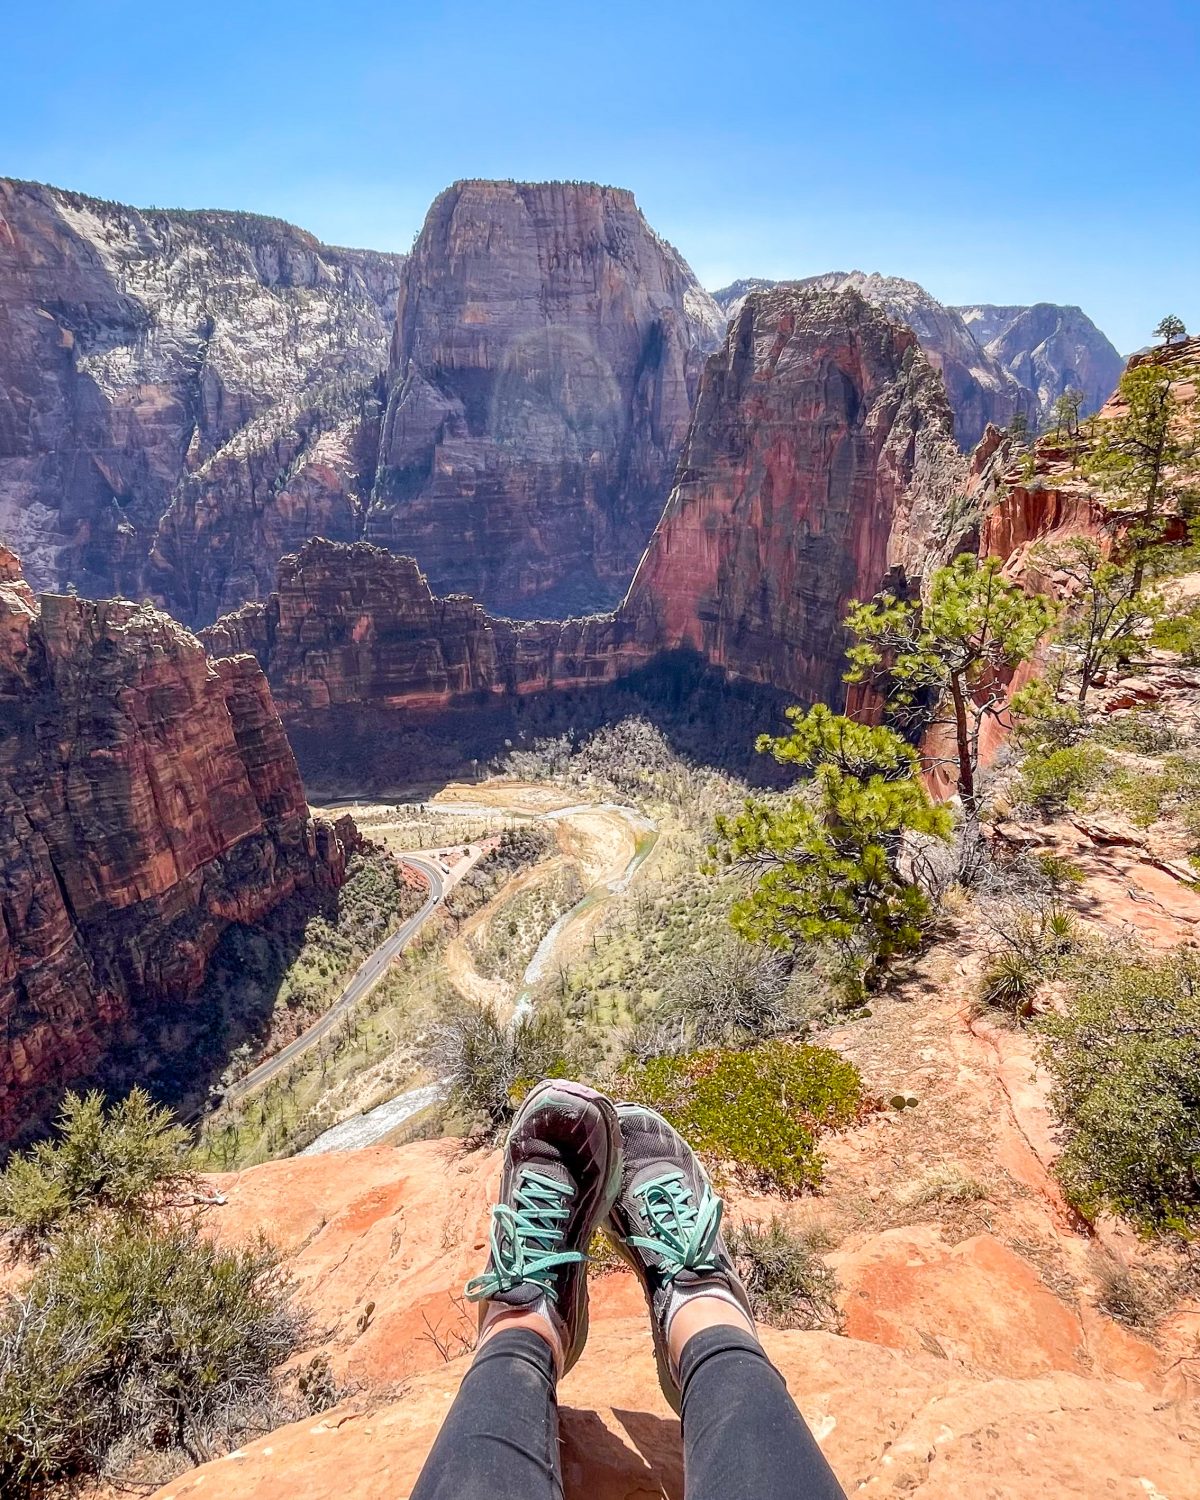 St. George Travel Guide - Zion National Park, Angel's Landing